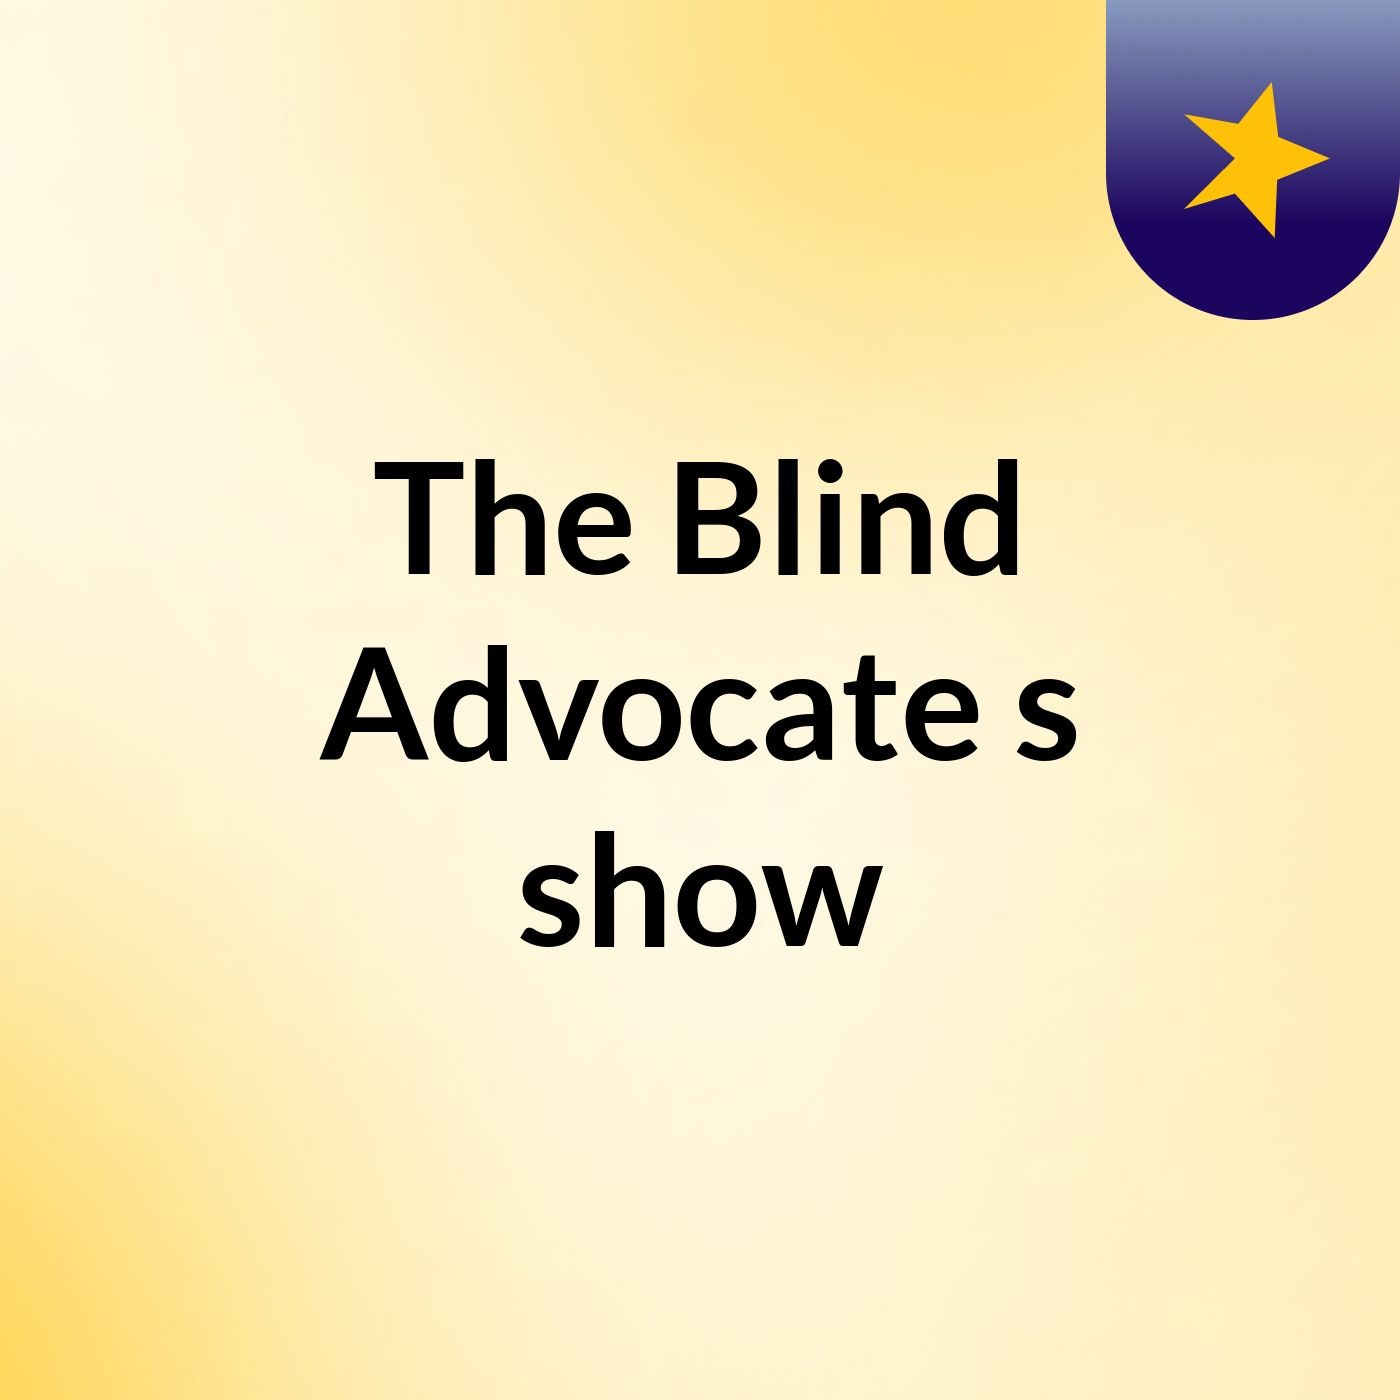 The Blind Advocate's show